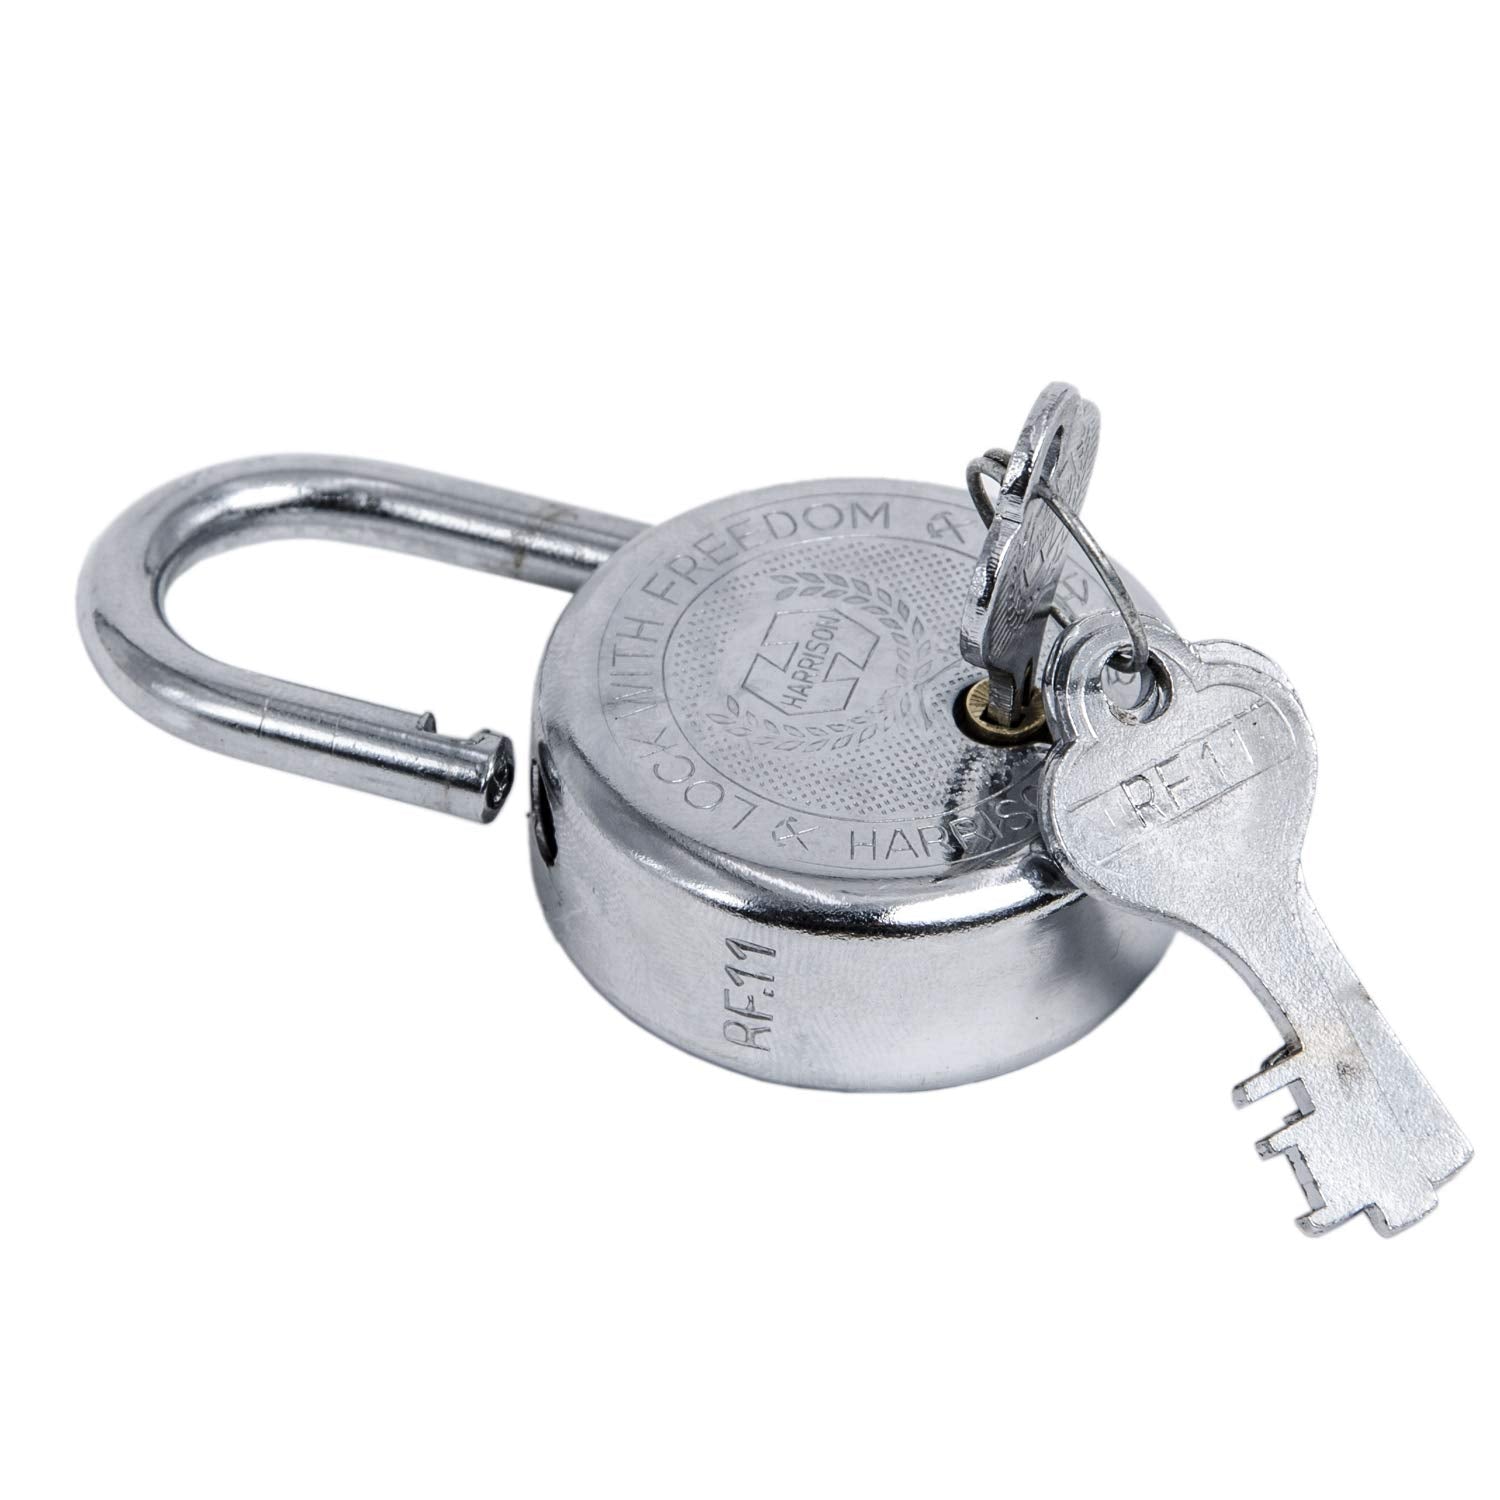 Harrison T-26/BCP-0272_PK 10 Steel 5 Levers Padlock with 3 Keys Each| Silver Finish| Round| Iron Padlock | Used for Travelling, Iron Grills| Pack of 10